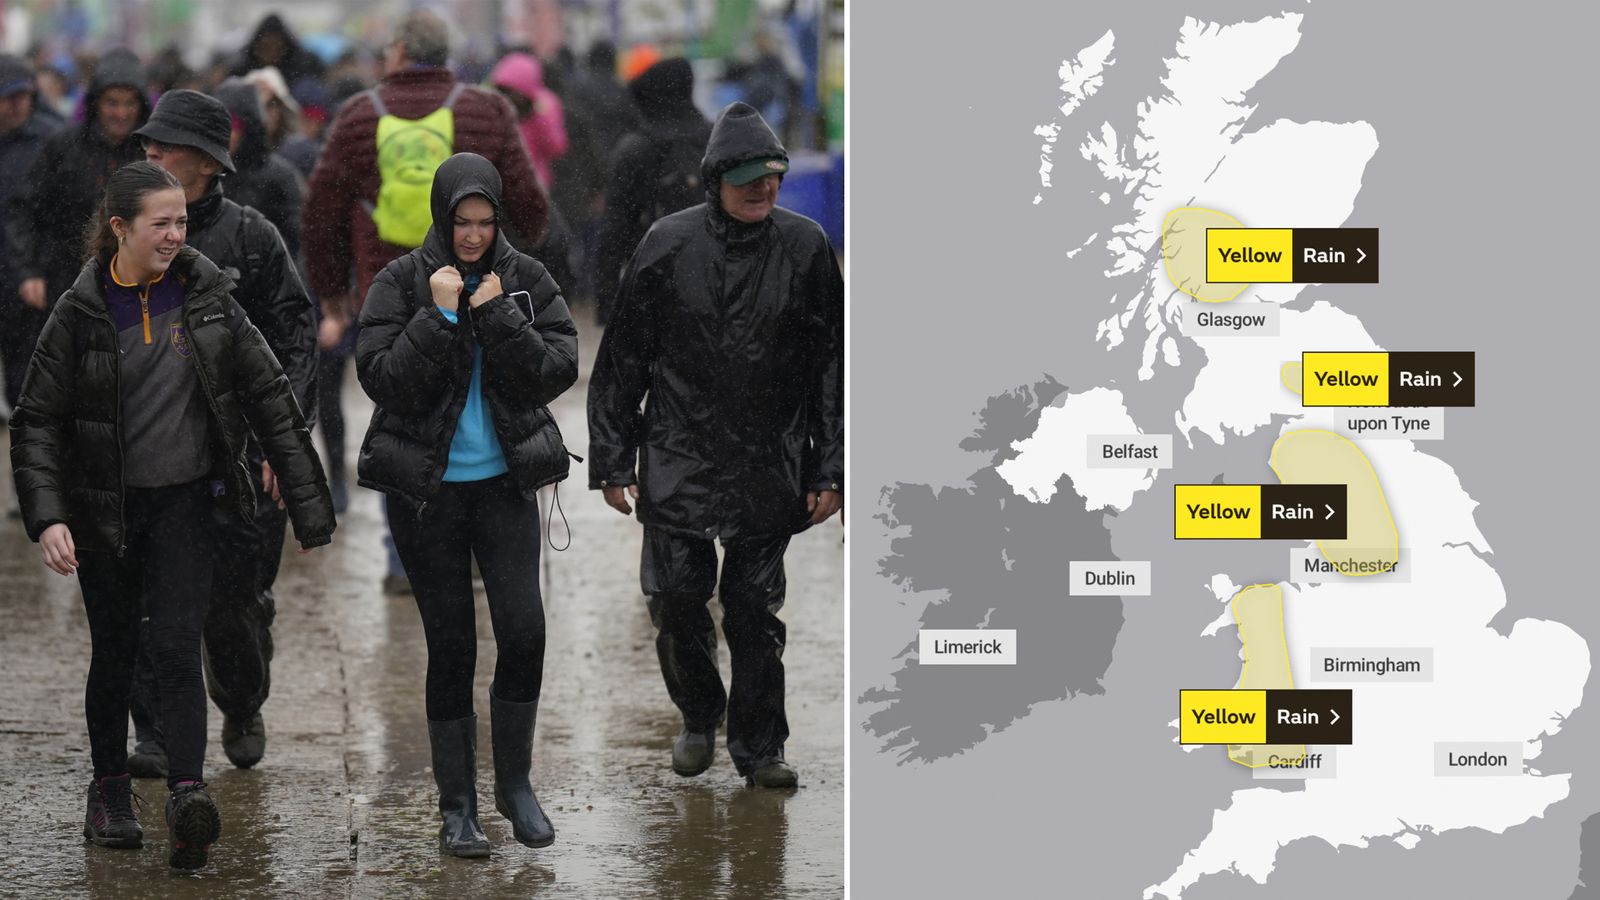 UK weather: Second hurricane forecast to bring storms amid ongoing yellow warnings for rain